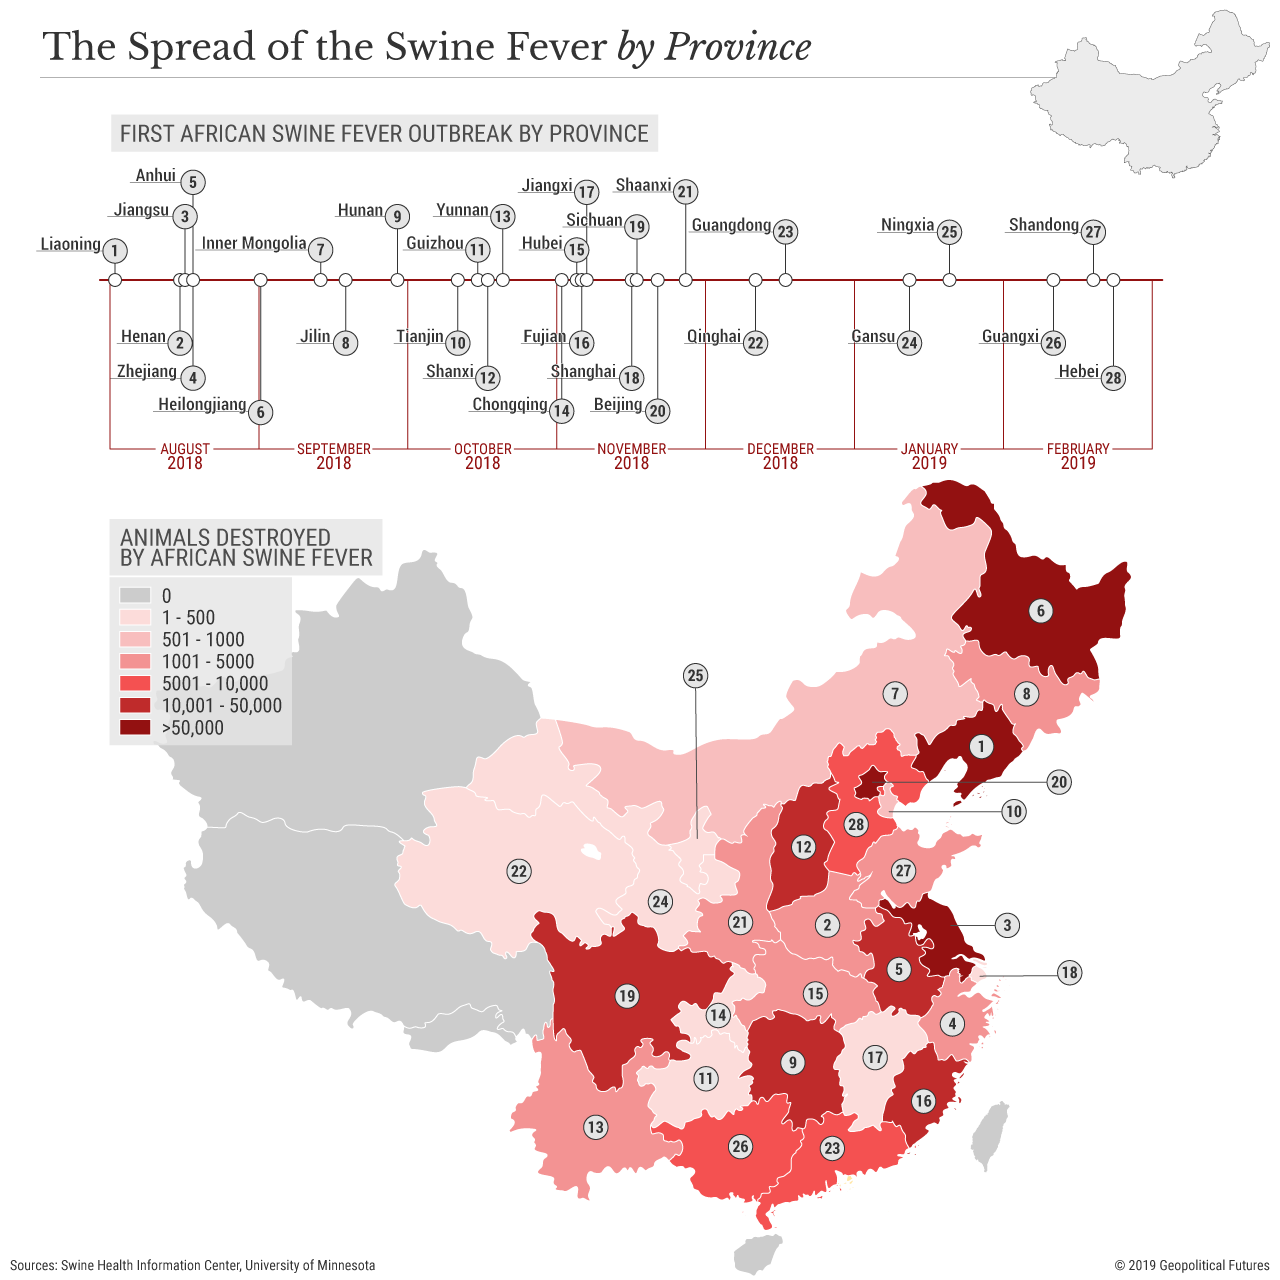 China Struggles to Contain an Outbreak | Geopolitical Futures1280 x 1280